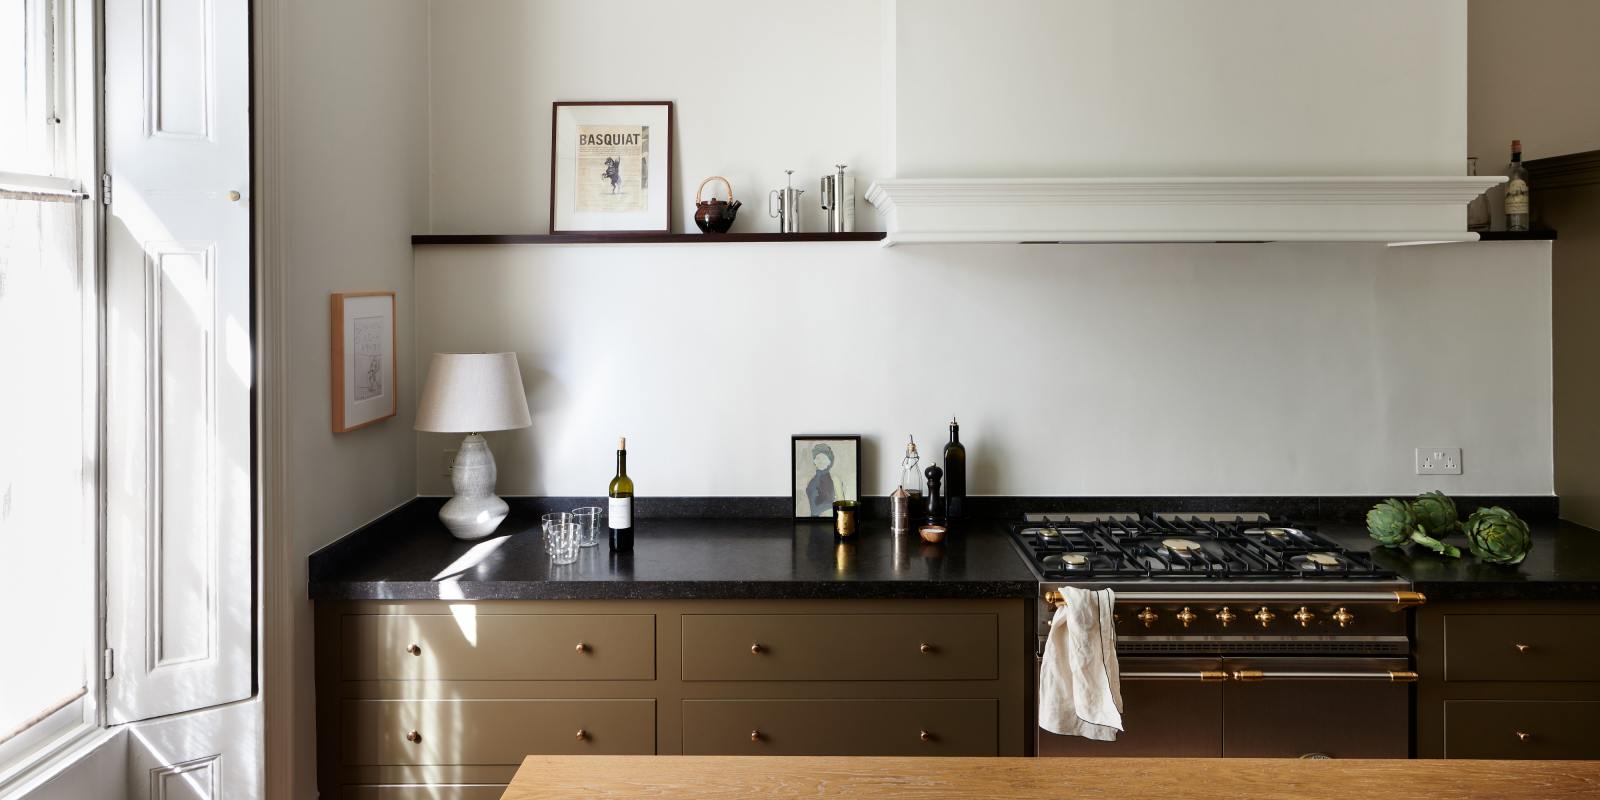 deVOL Kitchens - Simple Furniture, Beautifully Made - Kitchens & Home ...